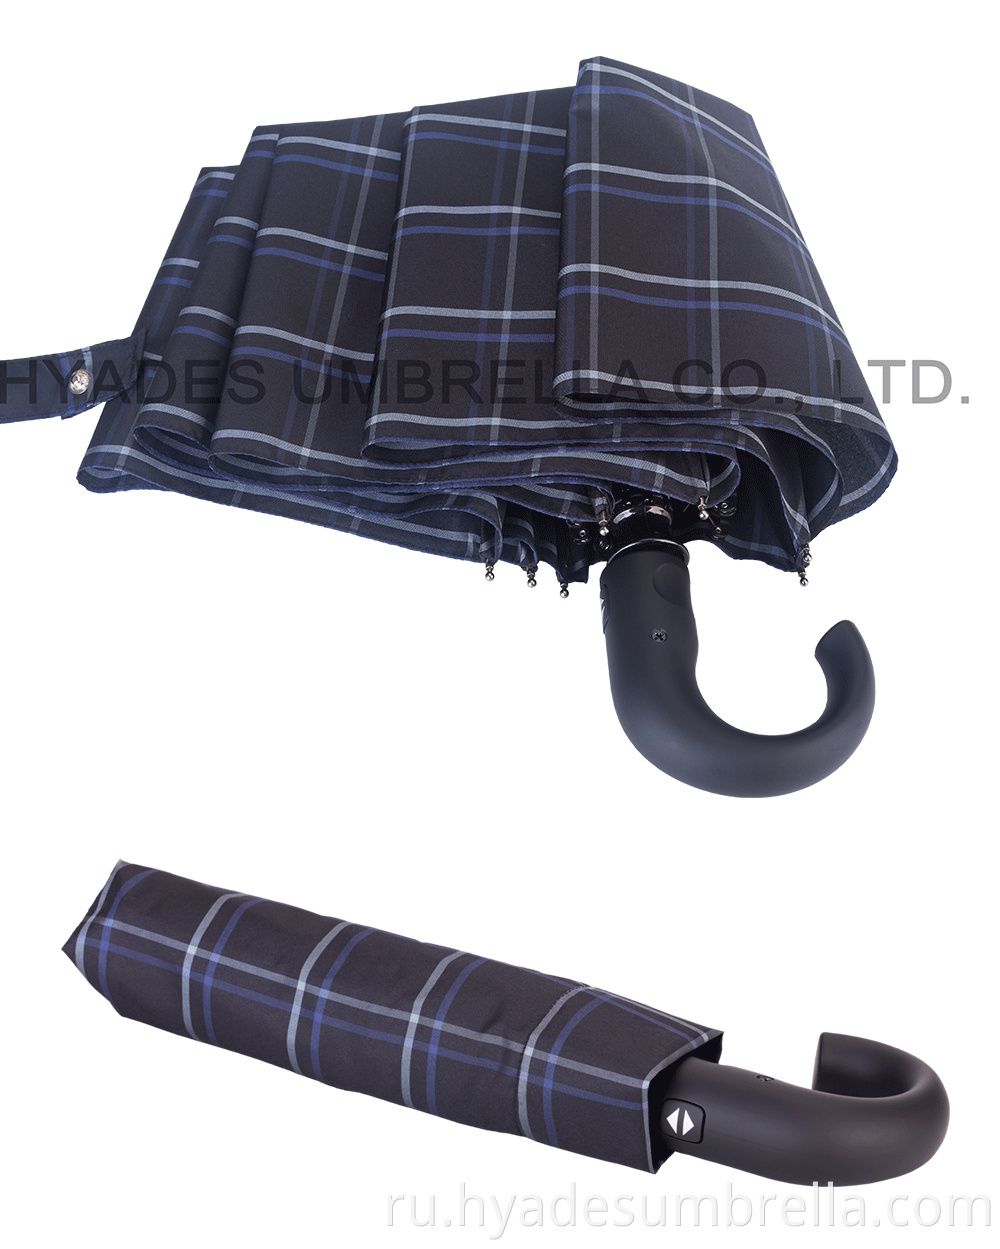 folding umbrella with curved handle